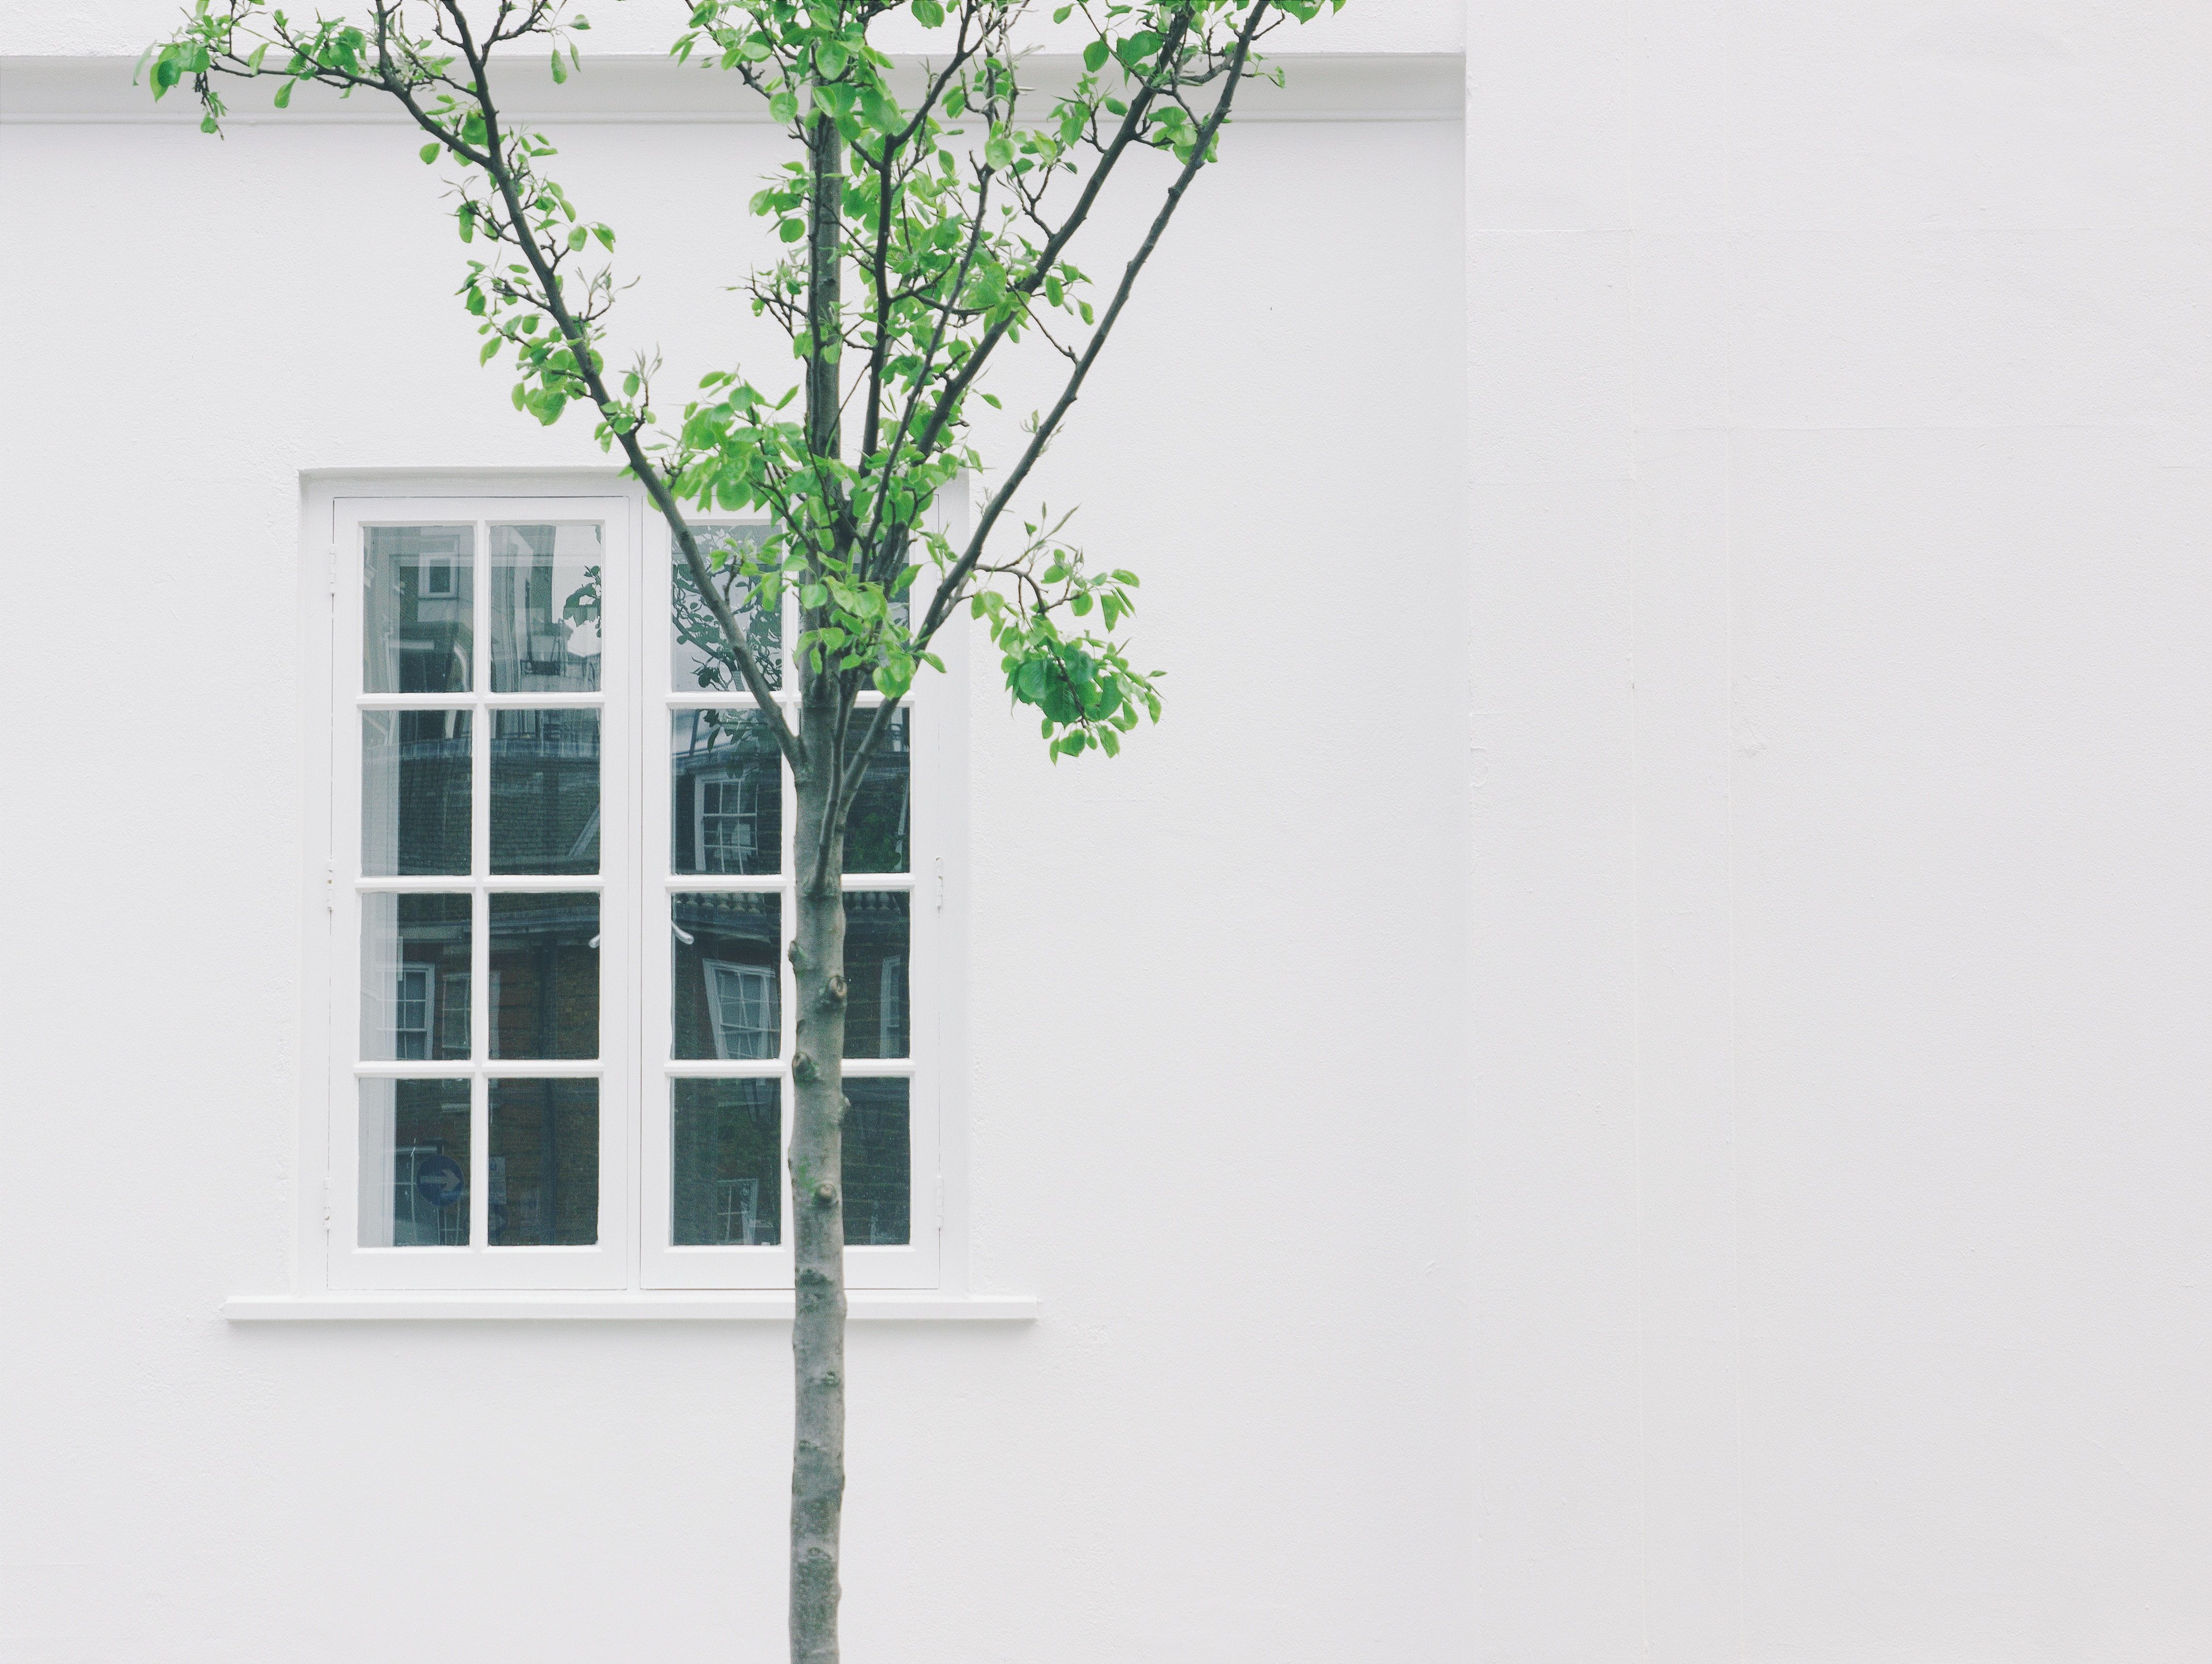 A tree with green leaves in front of a white building with a window. - Cozy, architecture